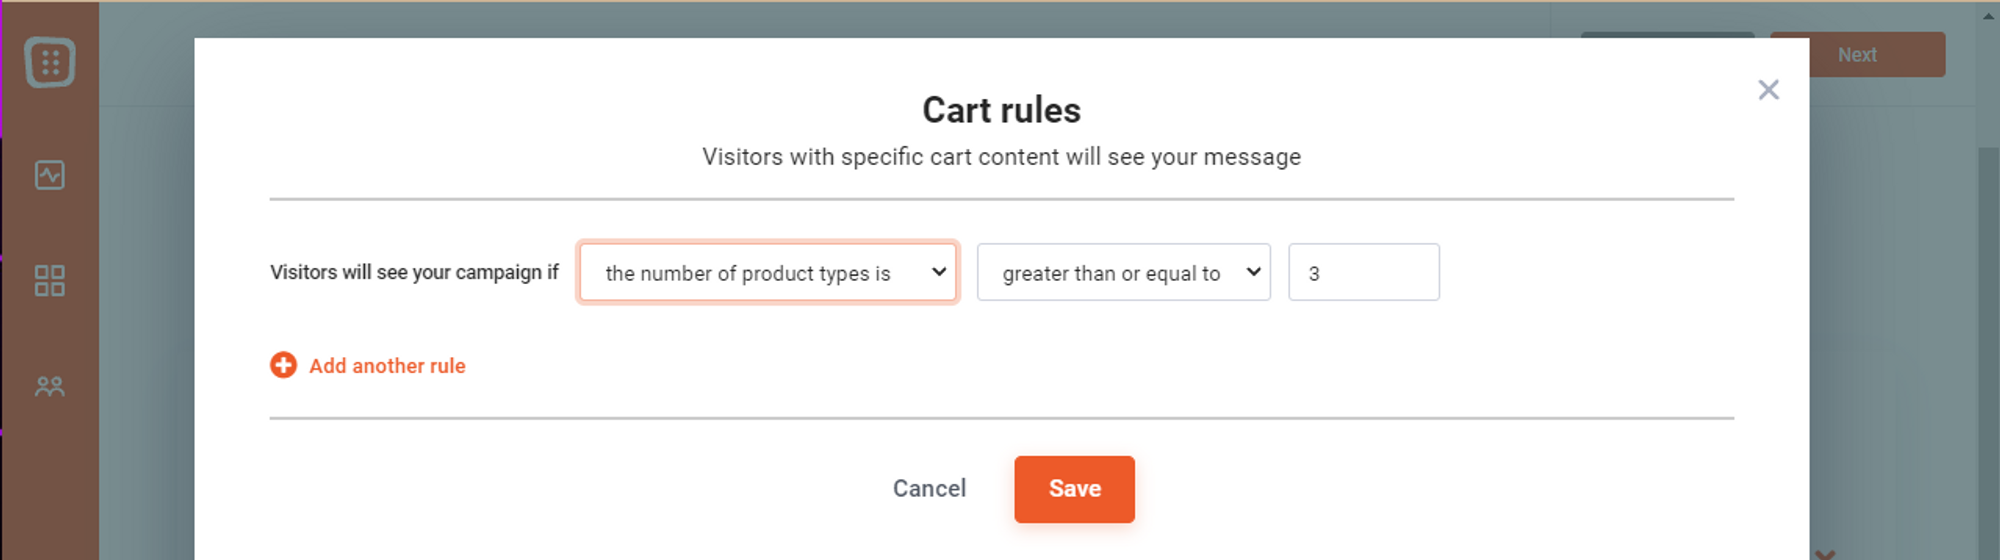 Cart_rules12.png